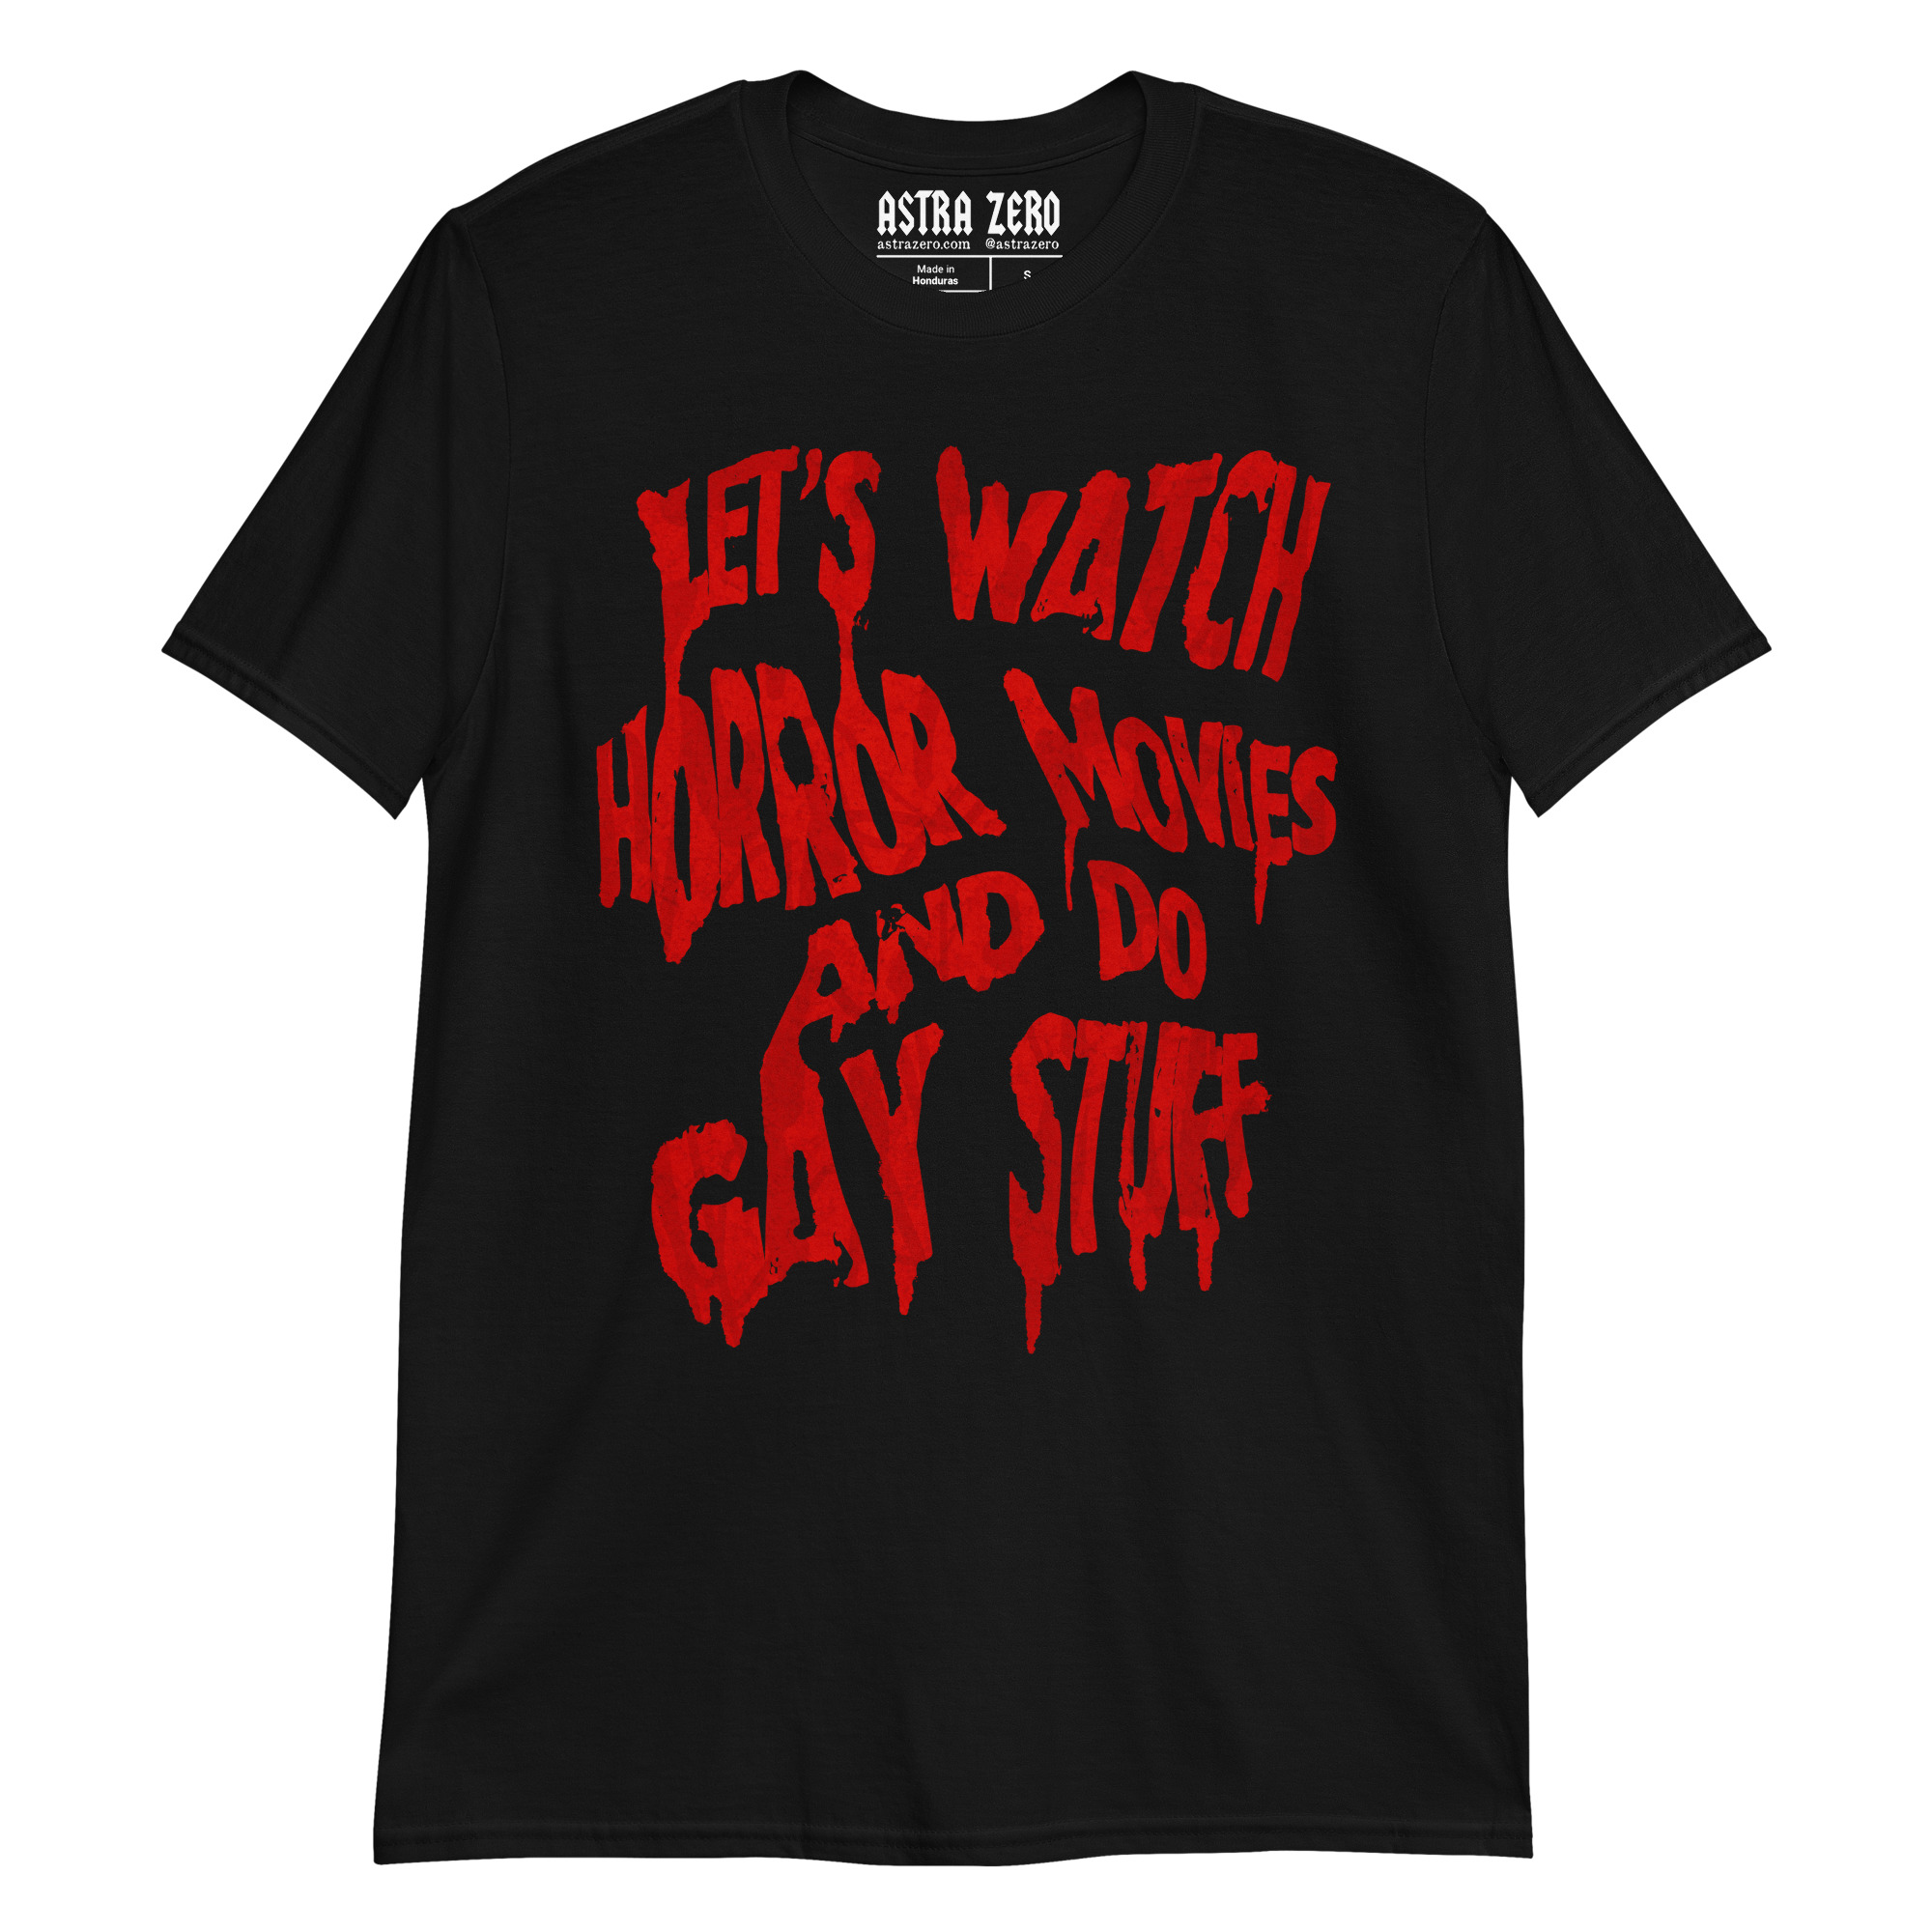 Featured image for “Let’s watch horror movies and do gay stuff - Short-Sleeve Unisex T-Shirt”